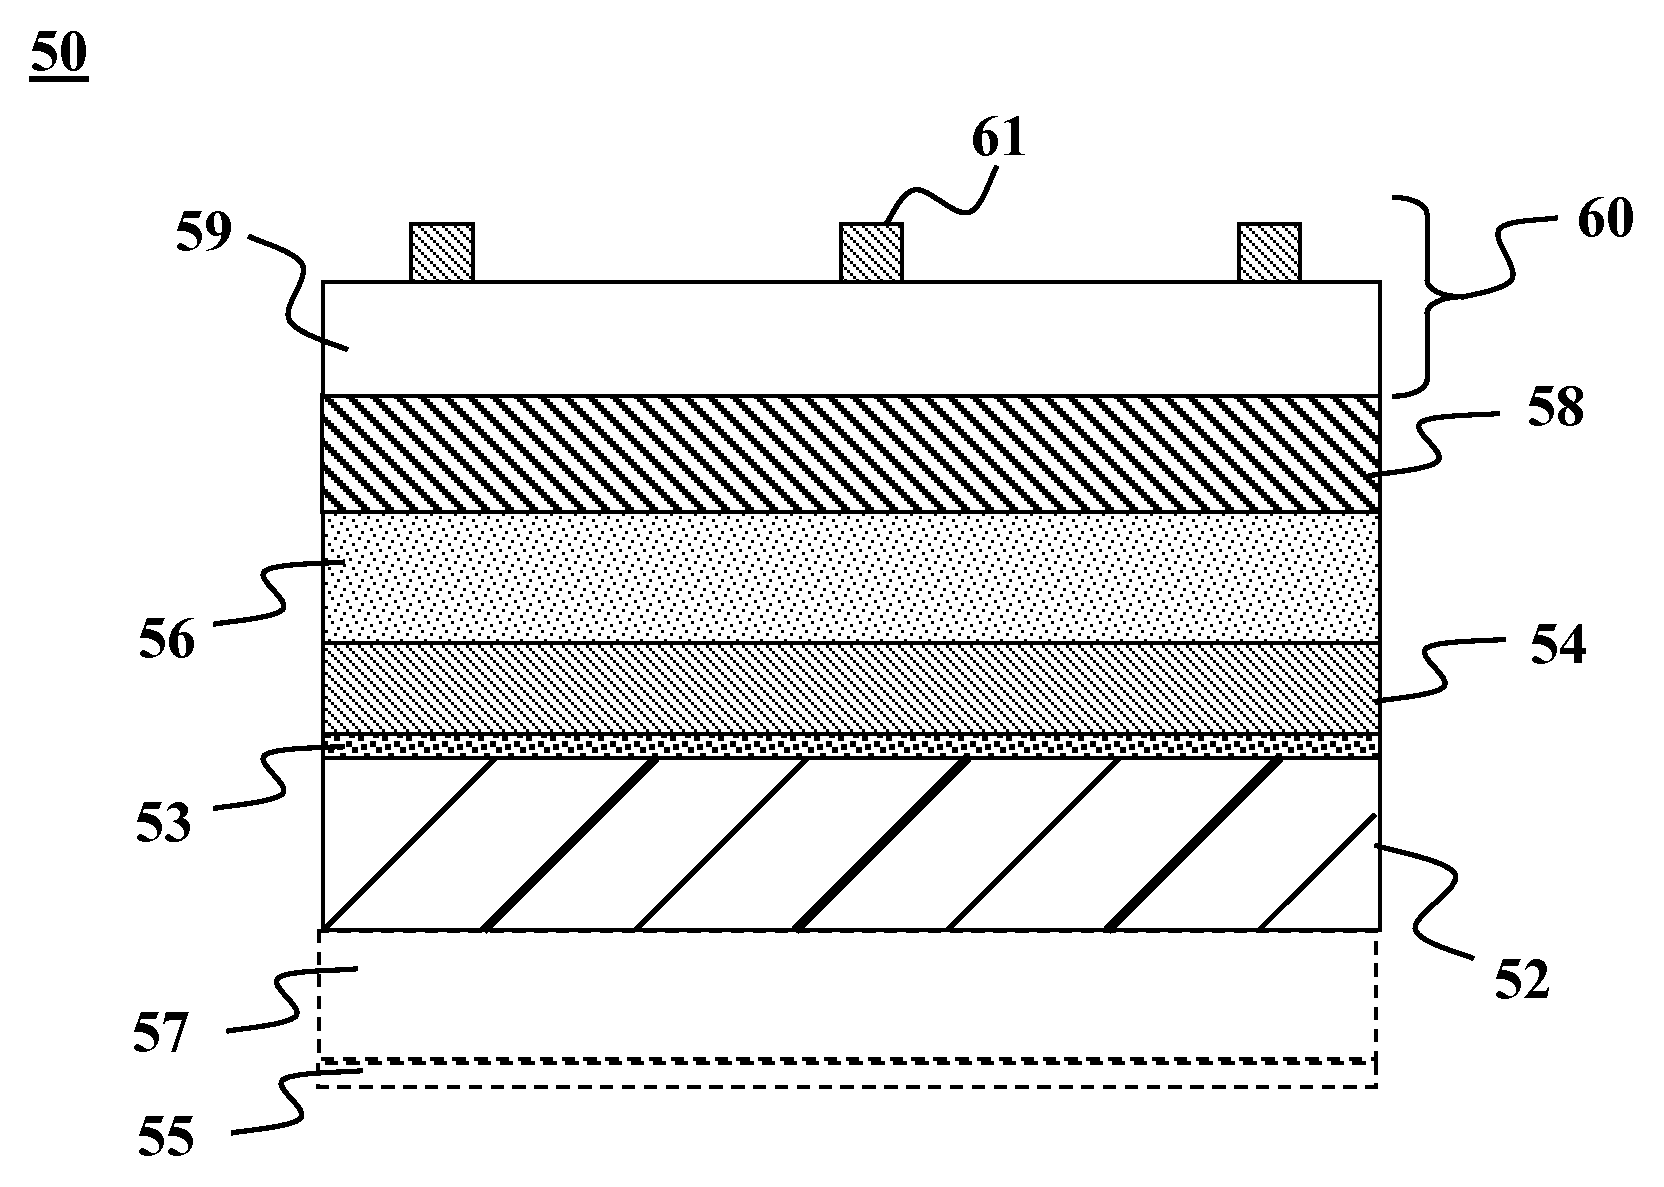 Roll-to-roll non-vacuum deposition of transparent conductive electrodes